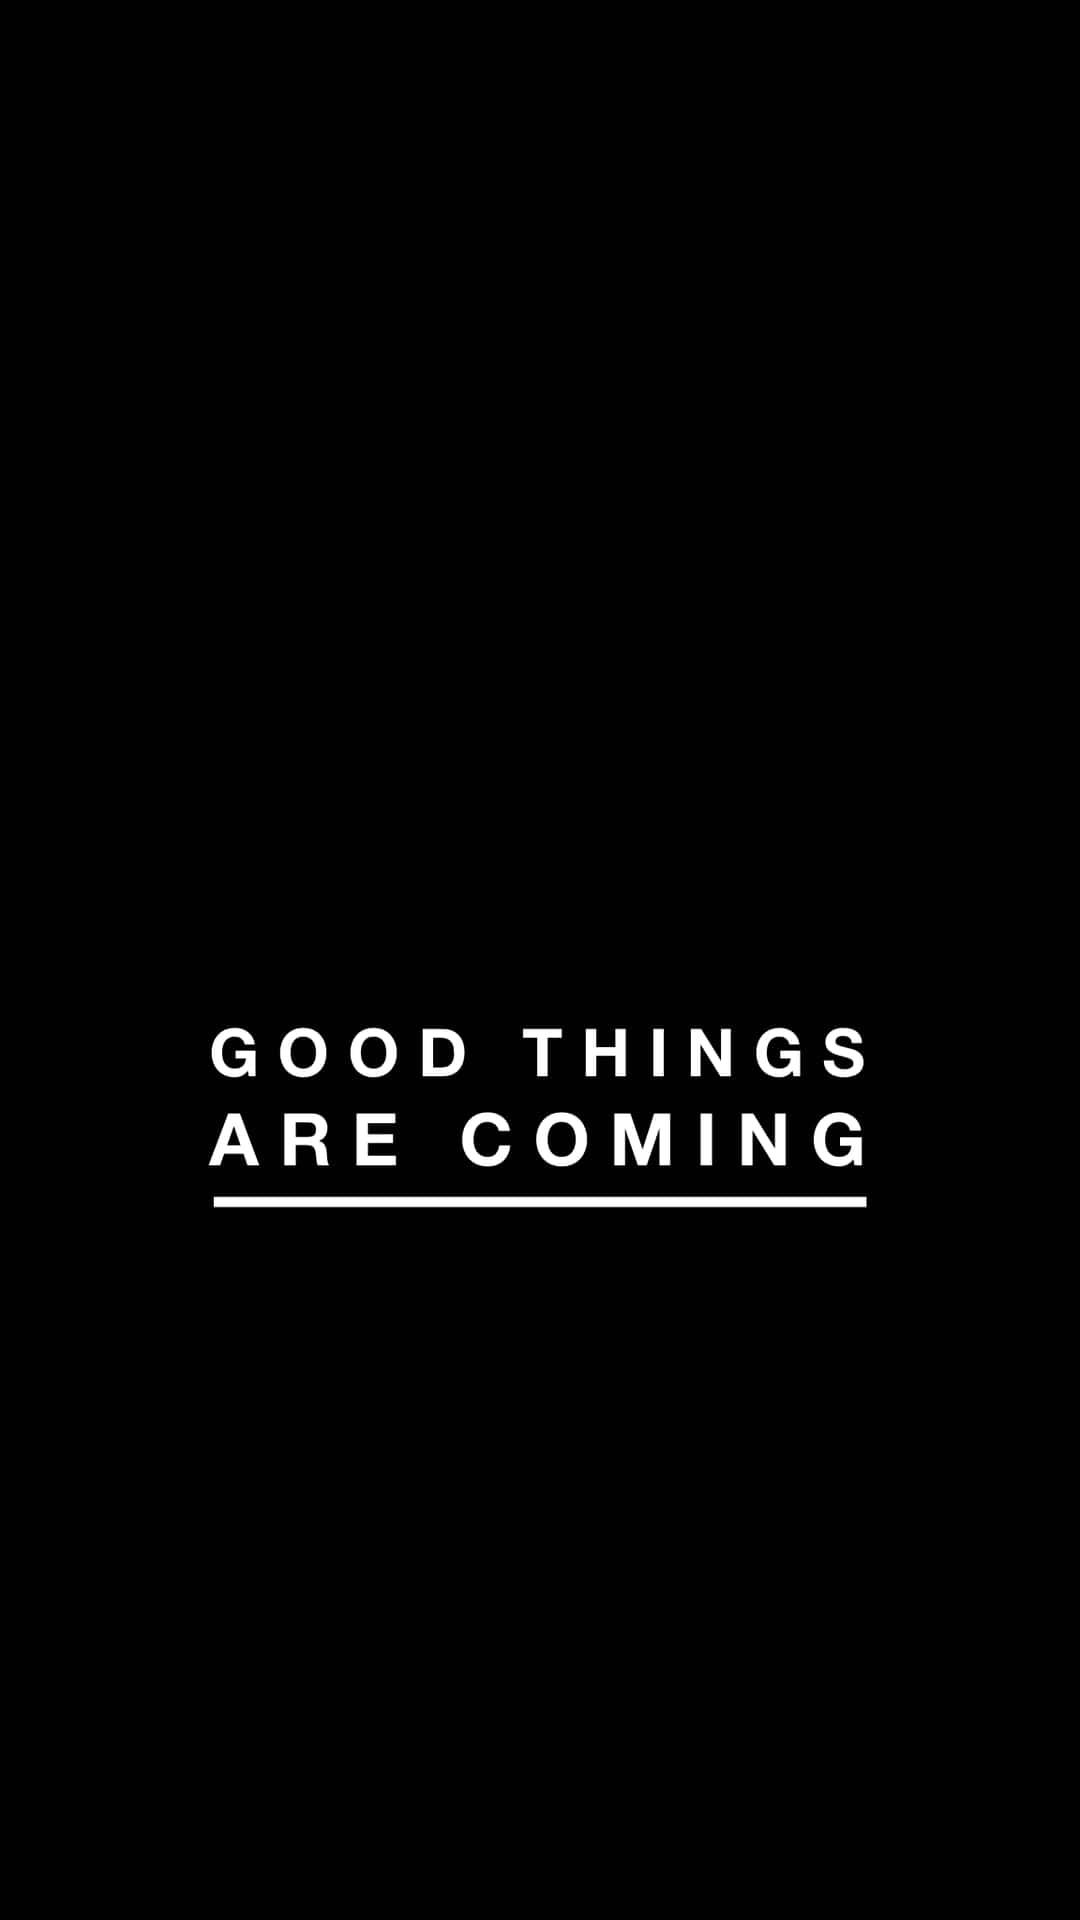 Black And White Quotes Simple Good Things Wallpaper